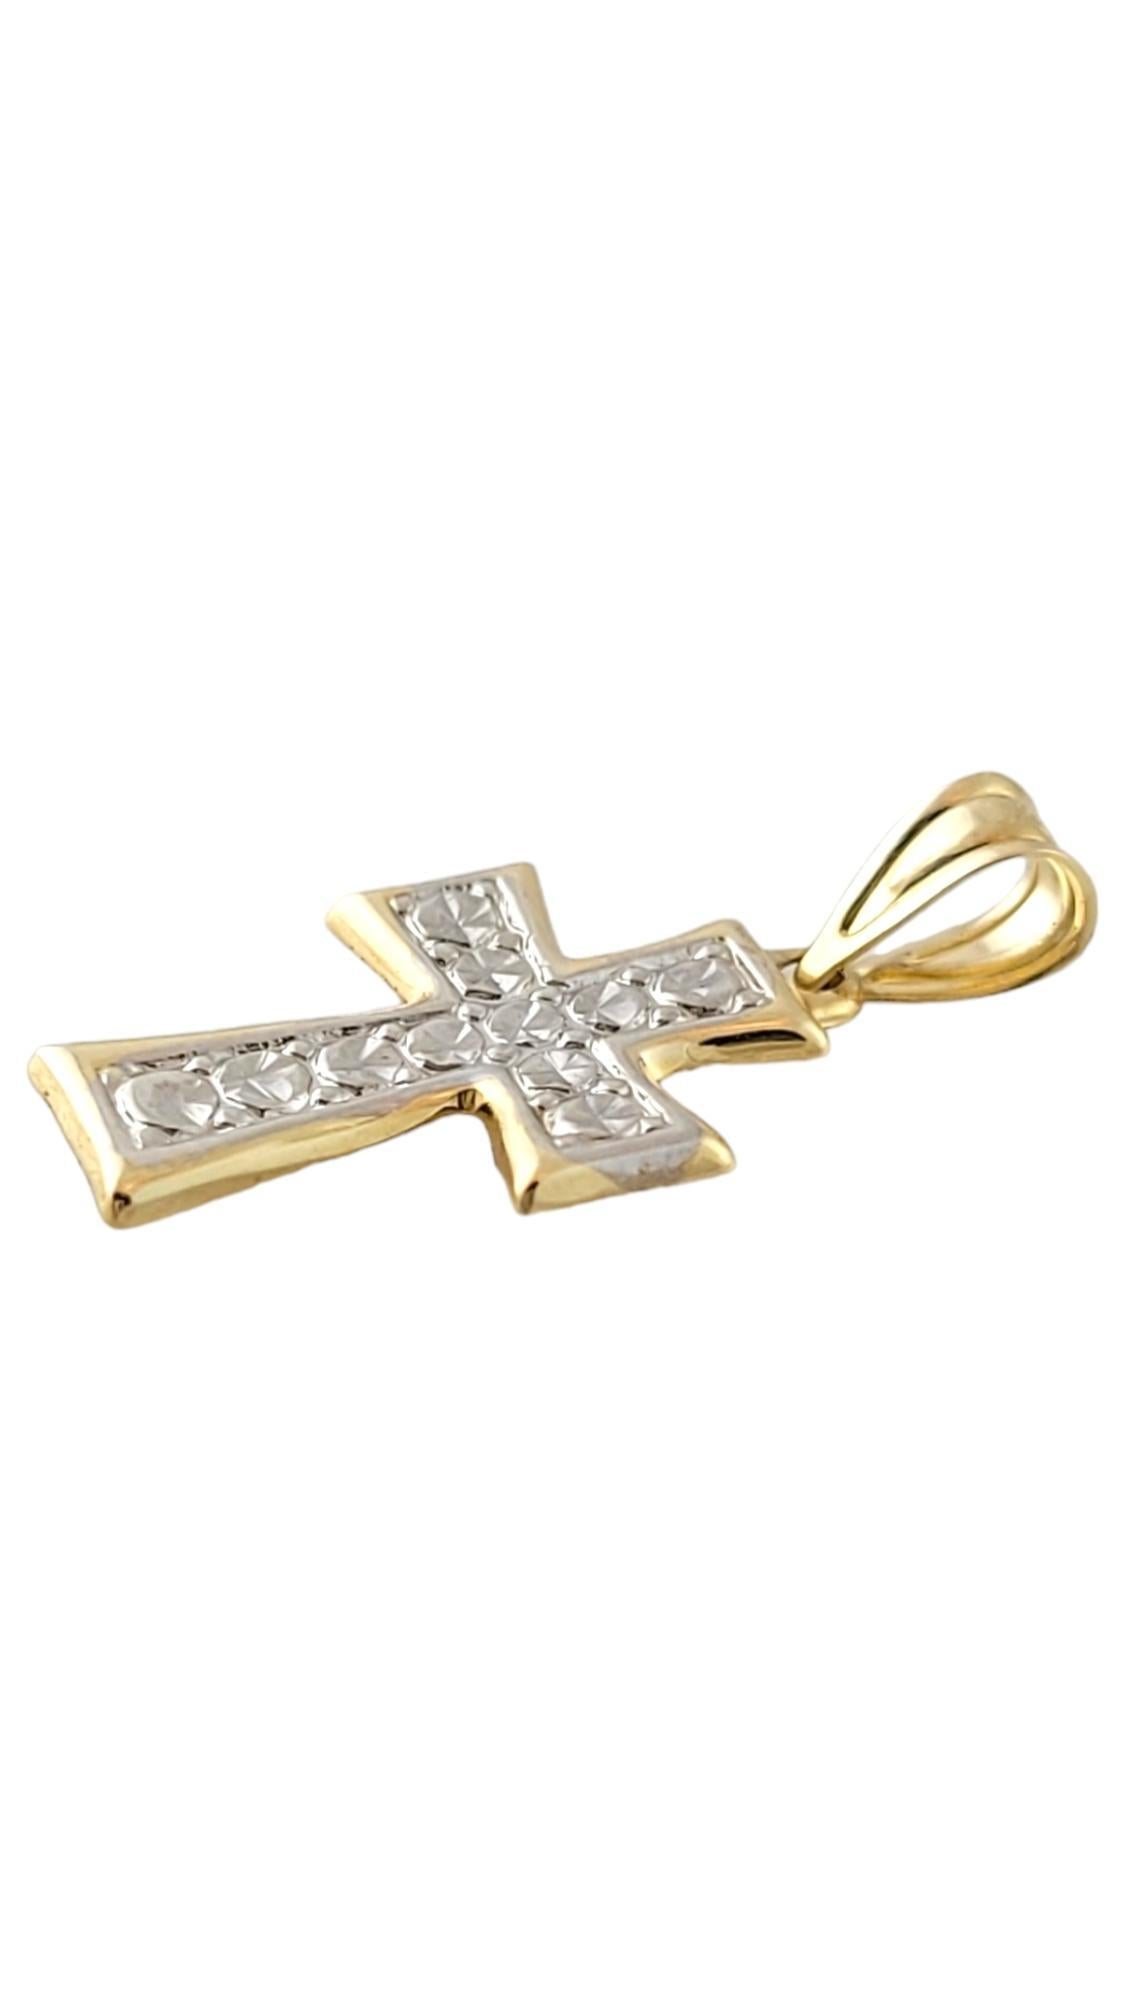 14K Yellow & White Gold Cross Pendant

This gorgeous cross pendant is crafted from 14K yellow and white gold for a beautiful finish!

Size: 17.68mm X 11.93mm X 0.88mm
Length w/ bail: 23.30mm

Weight: 0.24 dwt/ 0.37 g

Hallmark: 14K

Very good